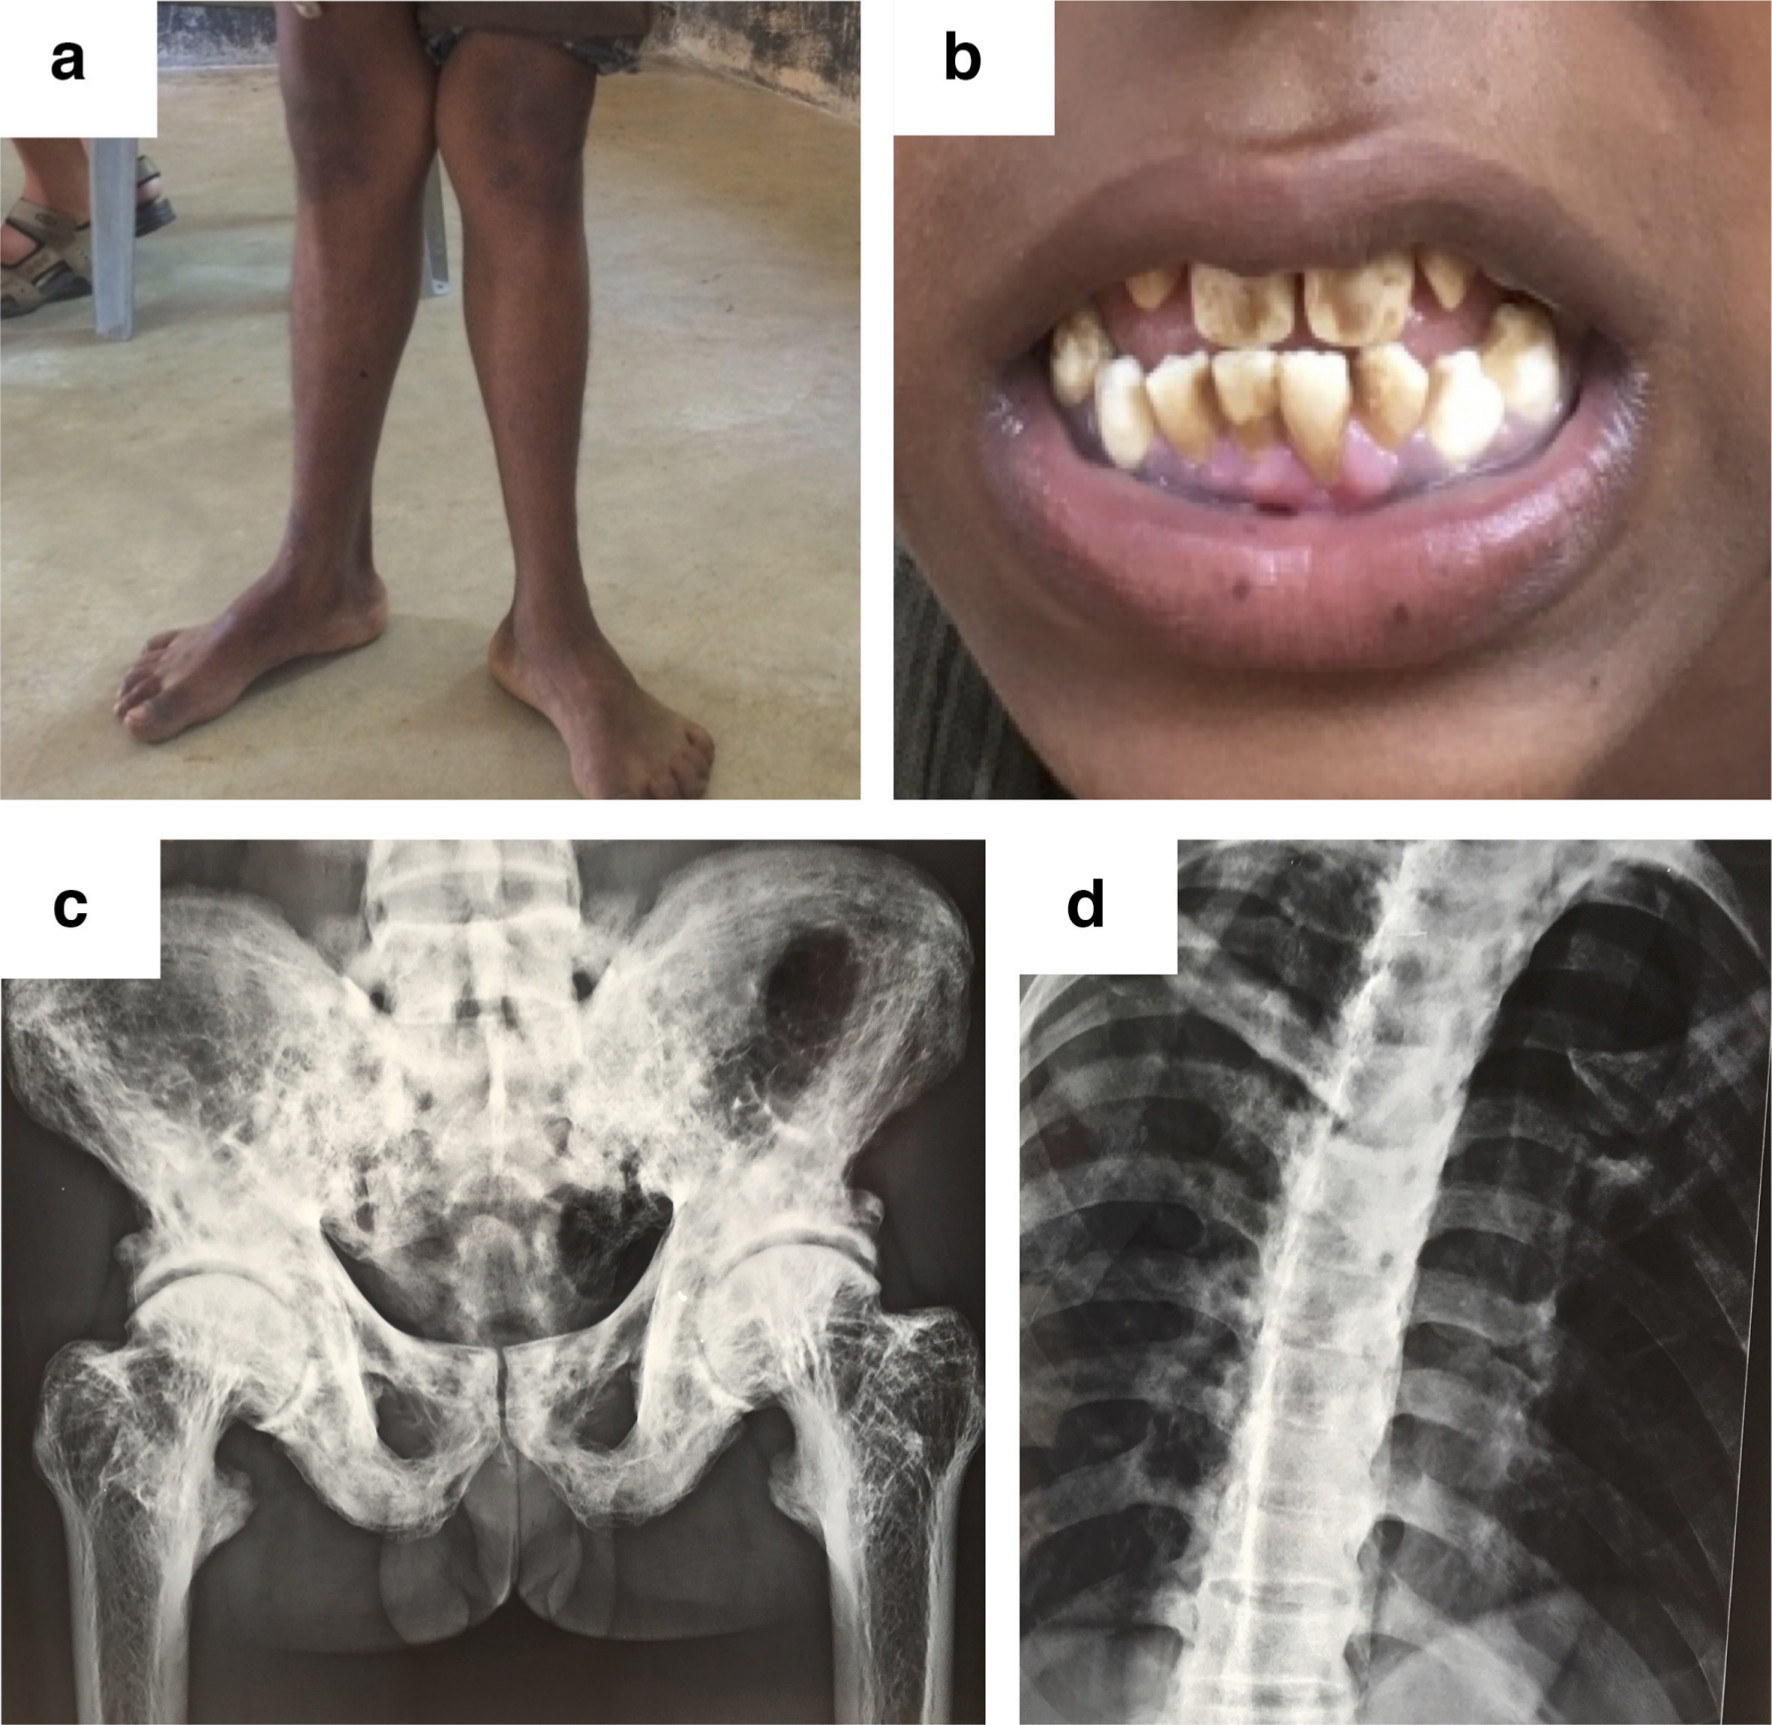 Fig. 6 
            Anteroposterior radiographs showing the skeletal effects of fluoride poisoning through drinking water in humans. a) Knee deformity in a 12-year-old boy and b) fluoride-induced discolouration of teeth. c) and d) show radiographs of patients exposed to high fluoride levels showing dense sclerotic pelvic bone and spine. Unpublished images used with permission from Prof. Urban Rydholm, Lund University Hospital, Lund, Sweden.
          